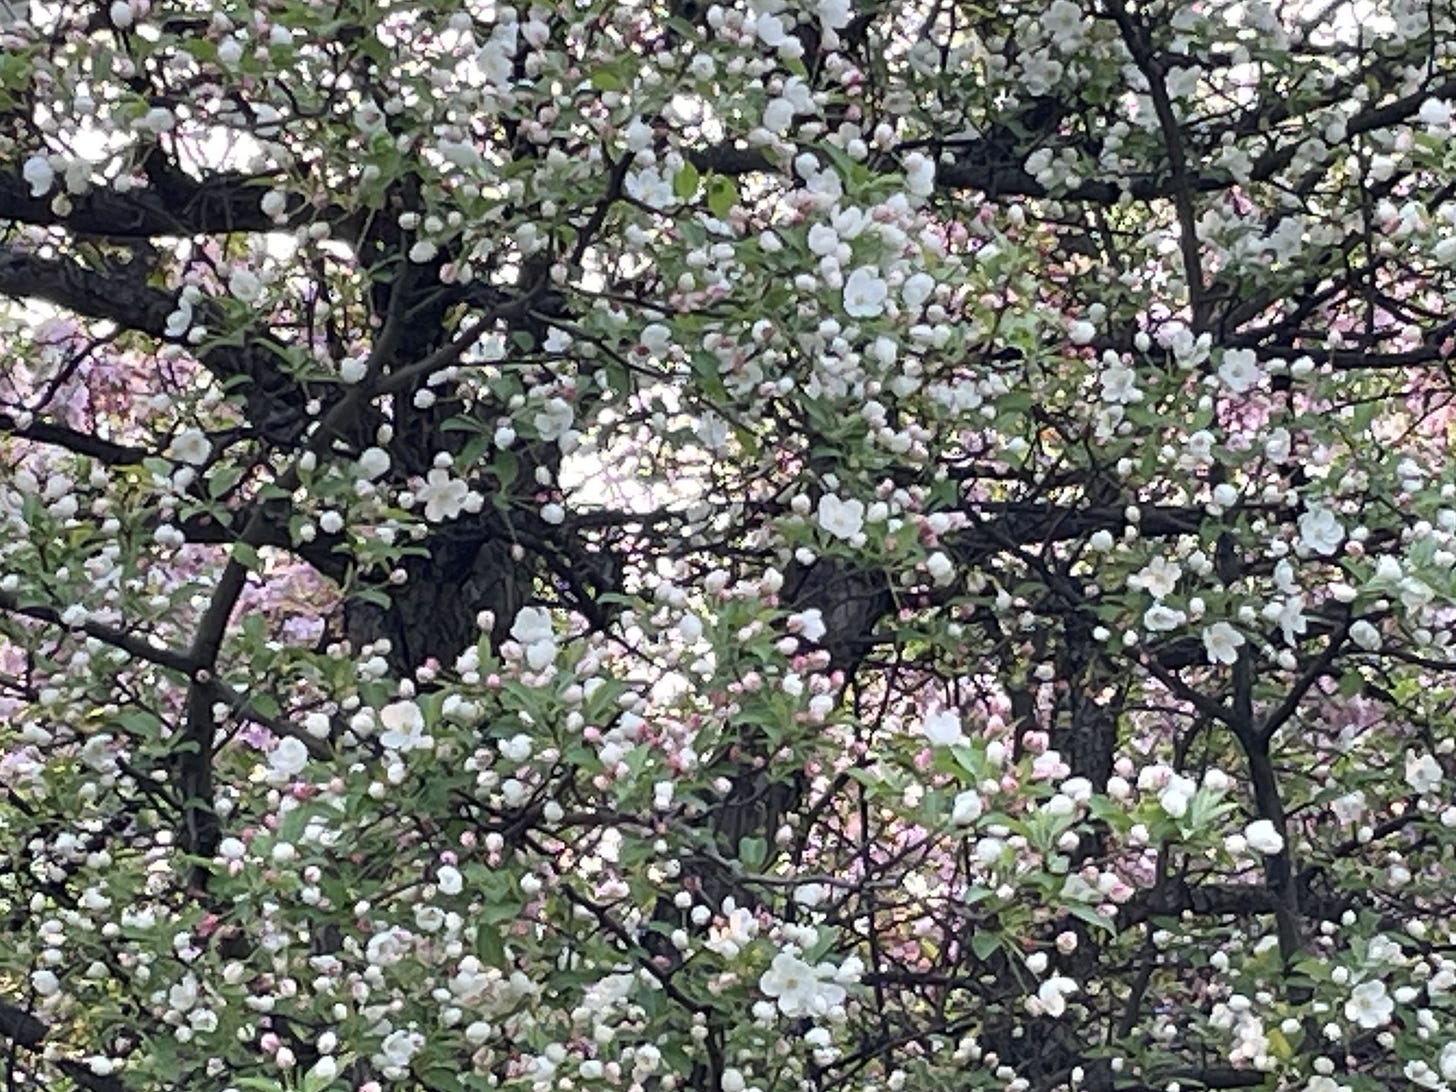 Slightly blurry photo of part of a blossoming plum tree